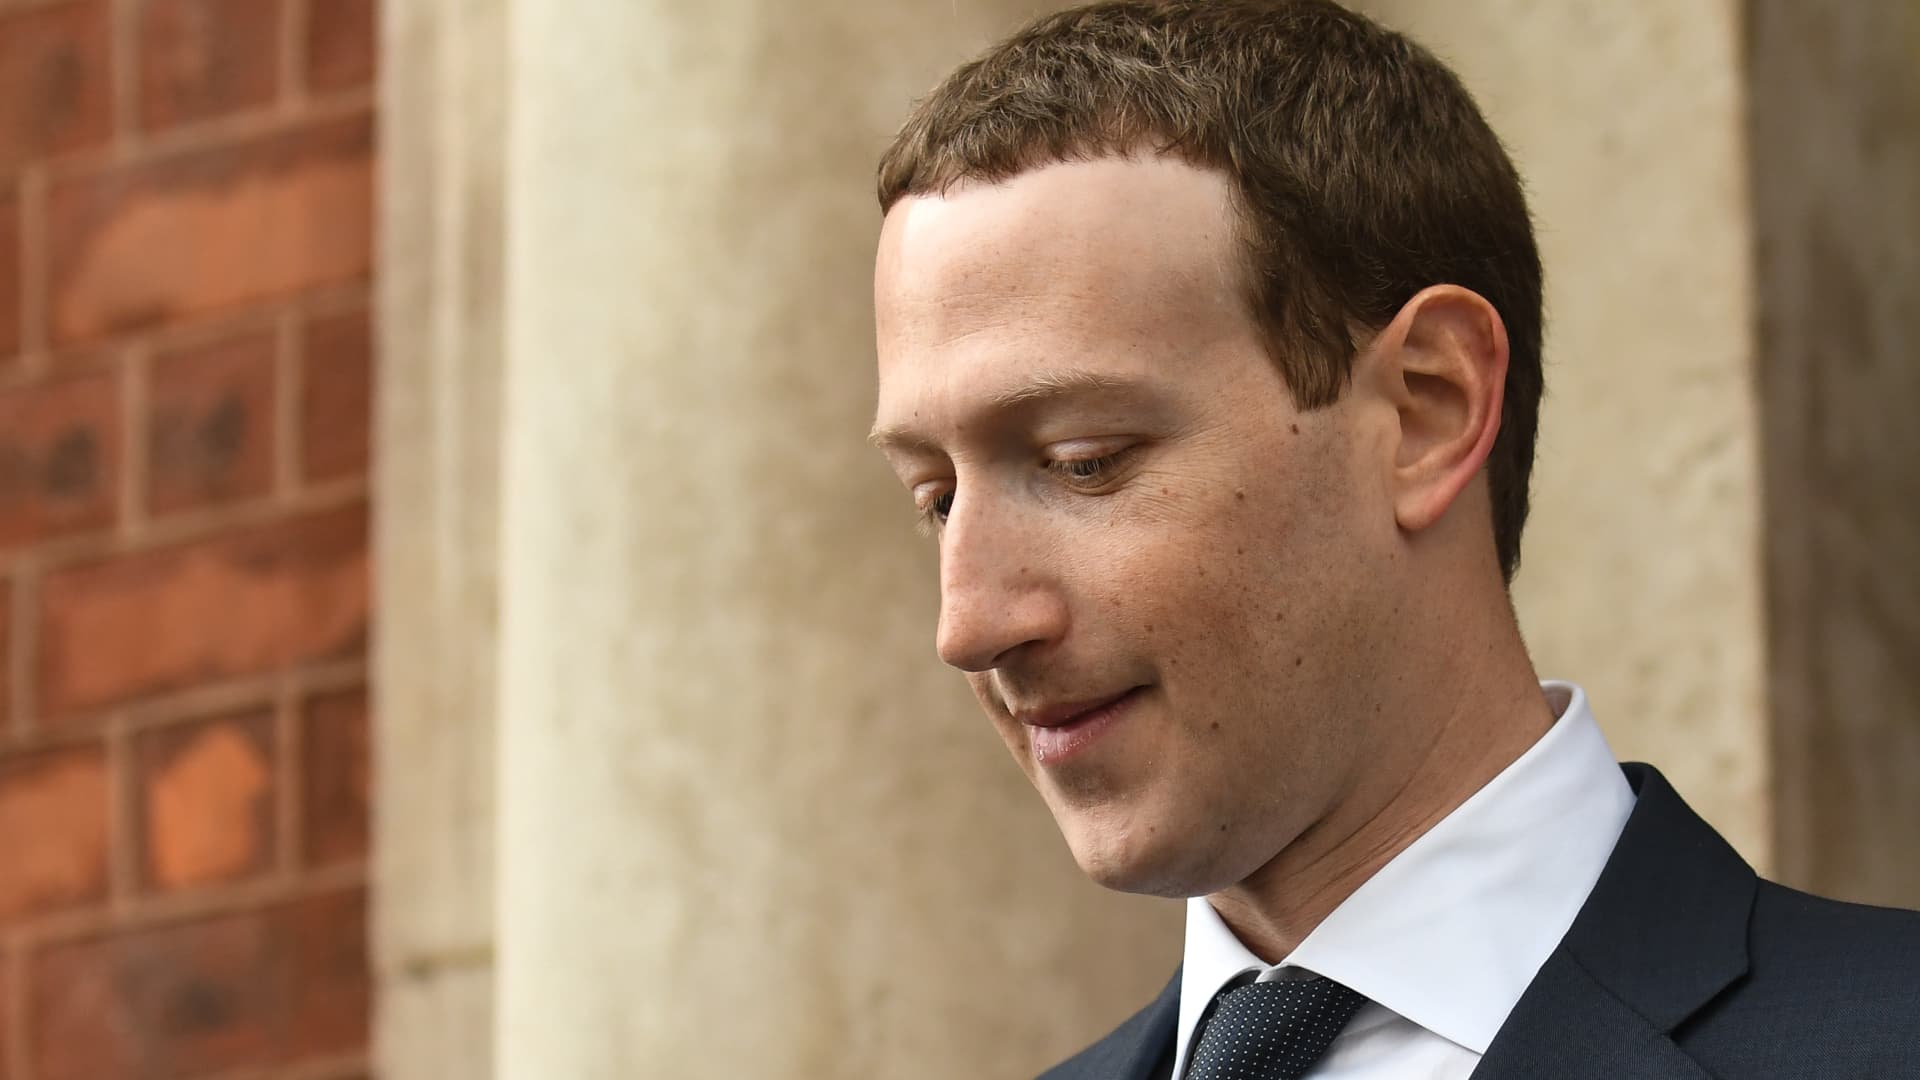 Meta     CEO Mark Zuckerberg has declared that 2023 is the company's "year of efficiency," and according to a release, that includes &